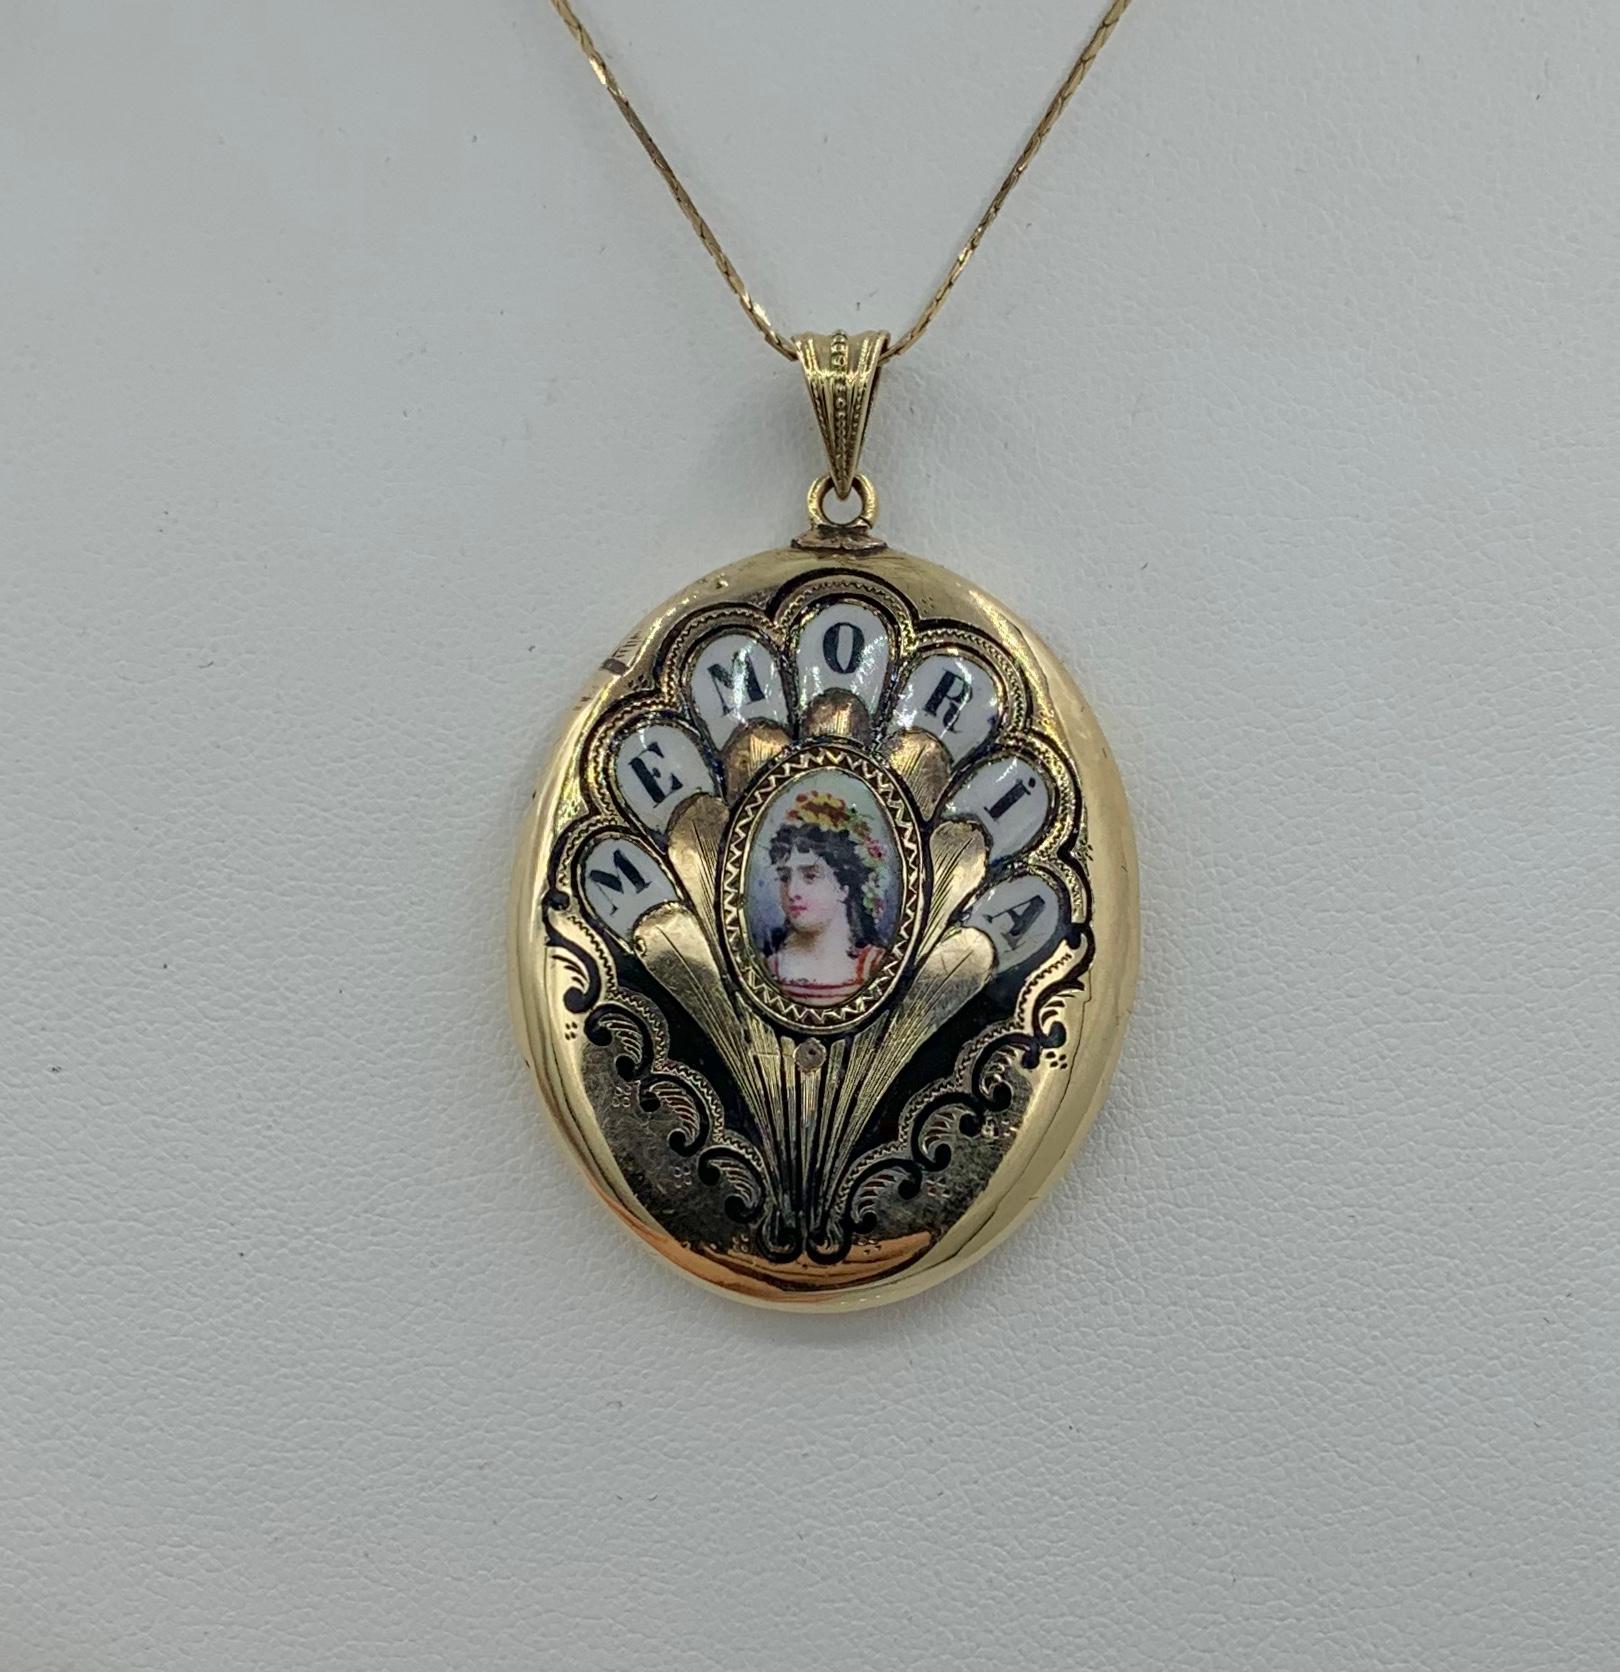 This is a Museum Quality Antique Victorian - Belle Epoque Locket Pendant with exquisite Enamel Portrait decoration, set with a Rose Cut Diamond and the word 